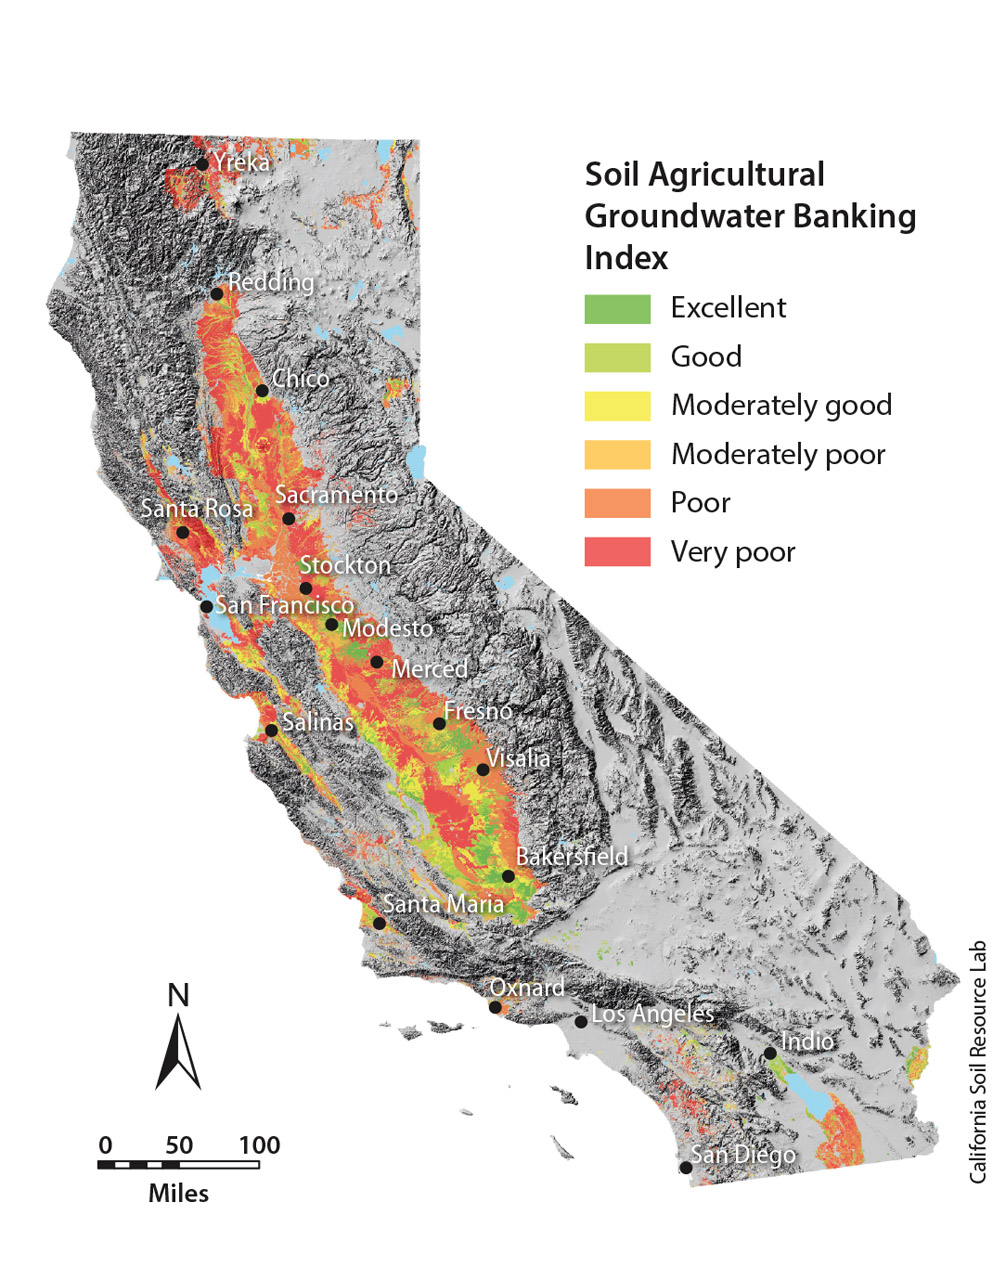 Spatial extent of Soil Agricultural Groundwater Banking Index suitability groups when not accounting for modifications by deep tillage.